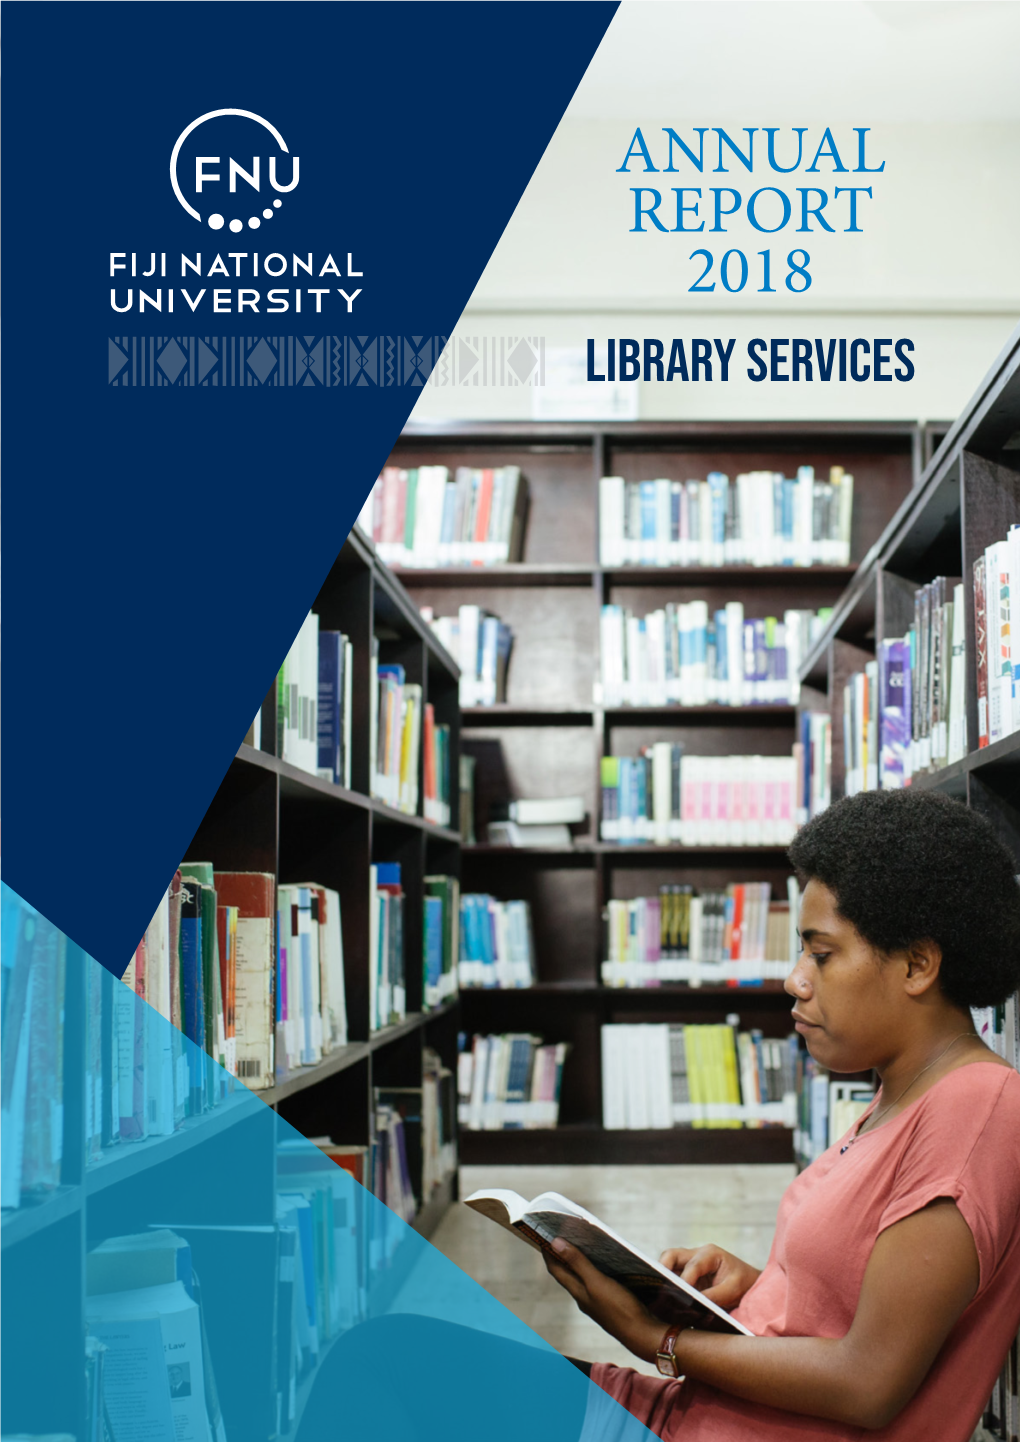 ANNUAL REPORT 2018 Library Services 8.0 Survey Results and Interpretation 8.0 Survey Results and Interpretation